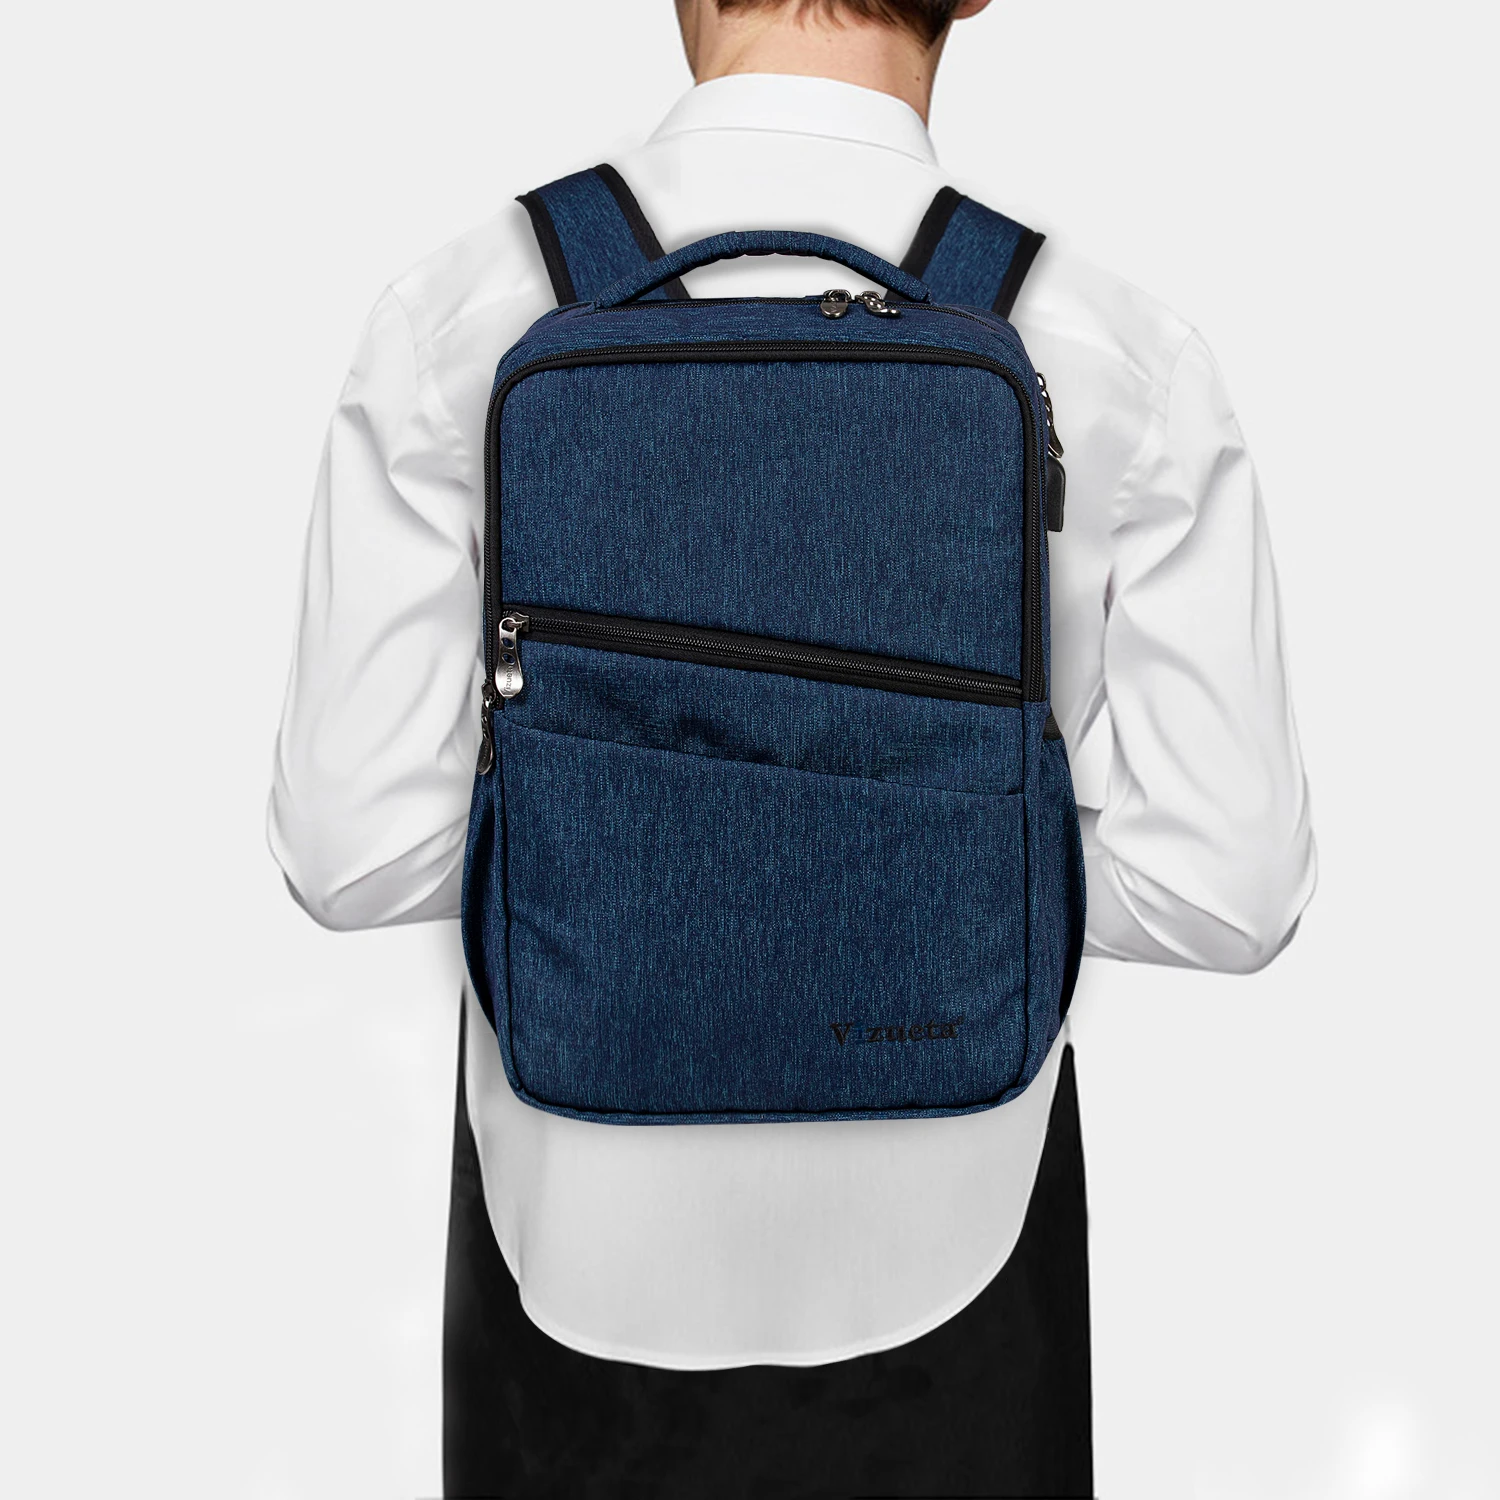 

Top Quality Student Travel Backpack Promotional Men Business Backpack Laptop Bag For Outdoor, Accept customized logo